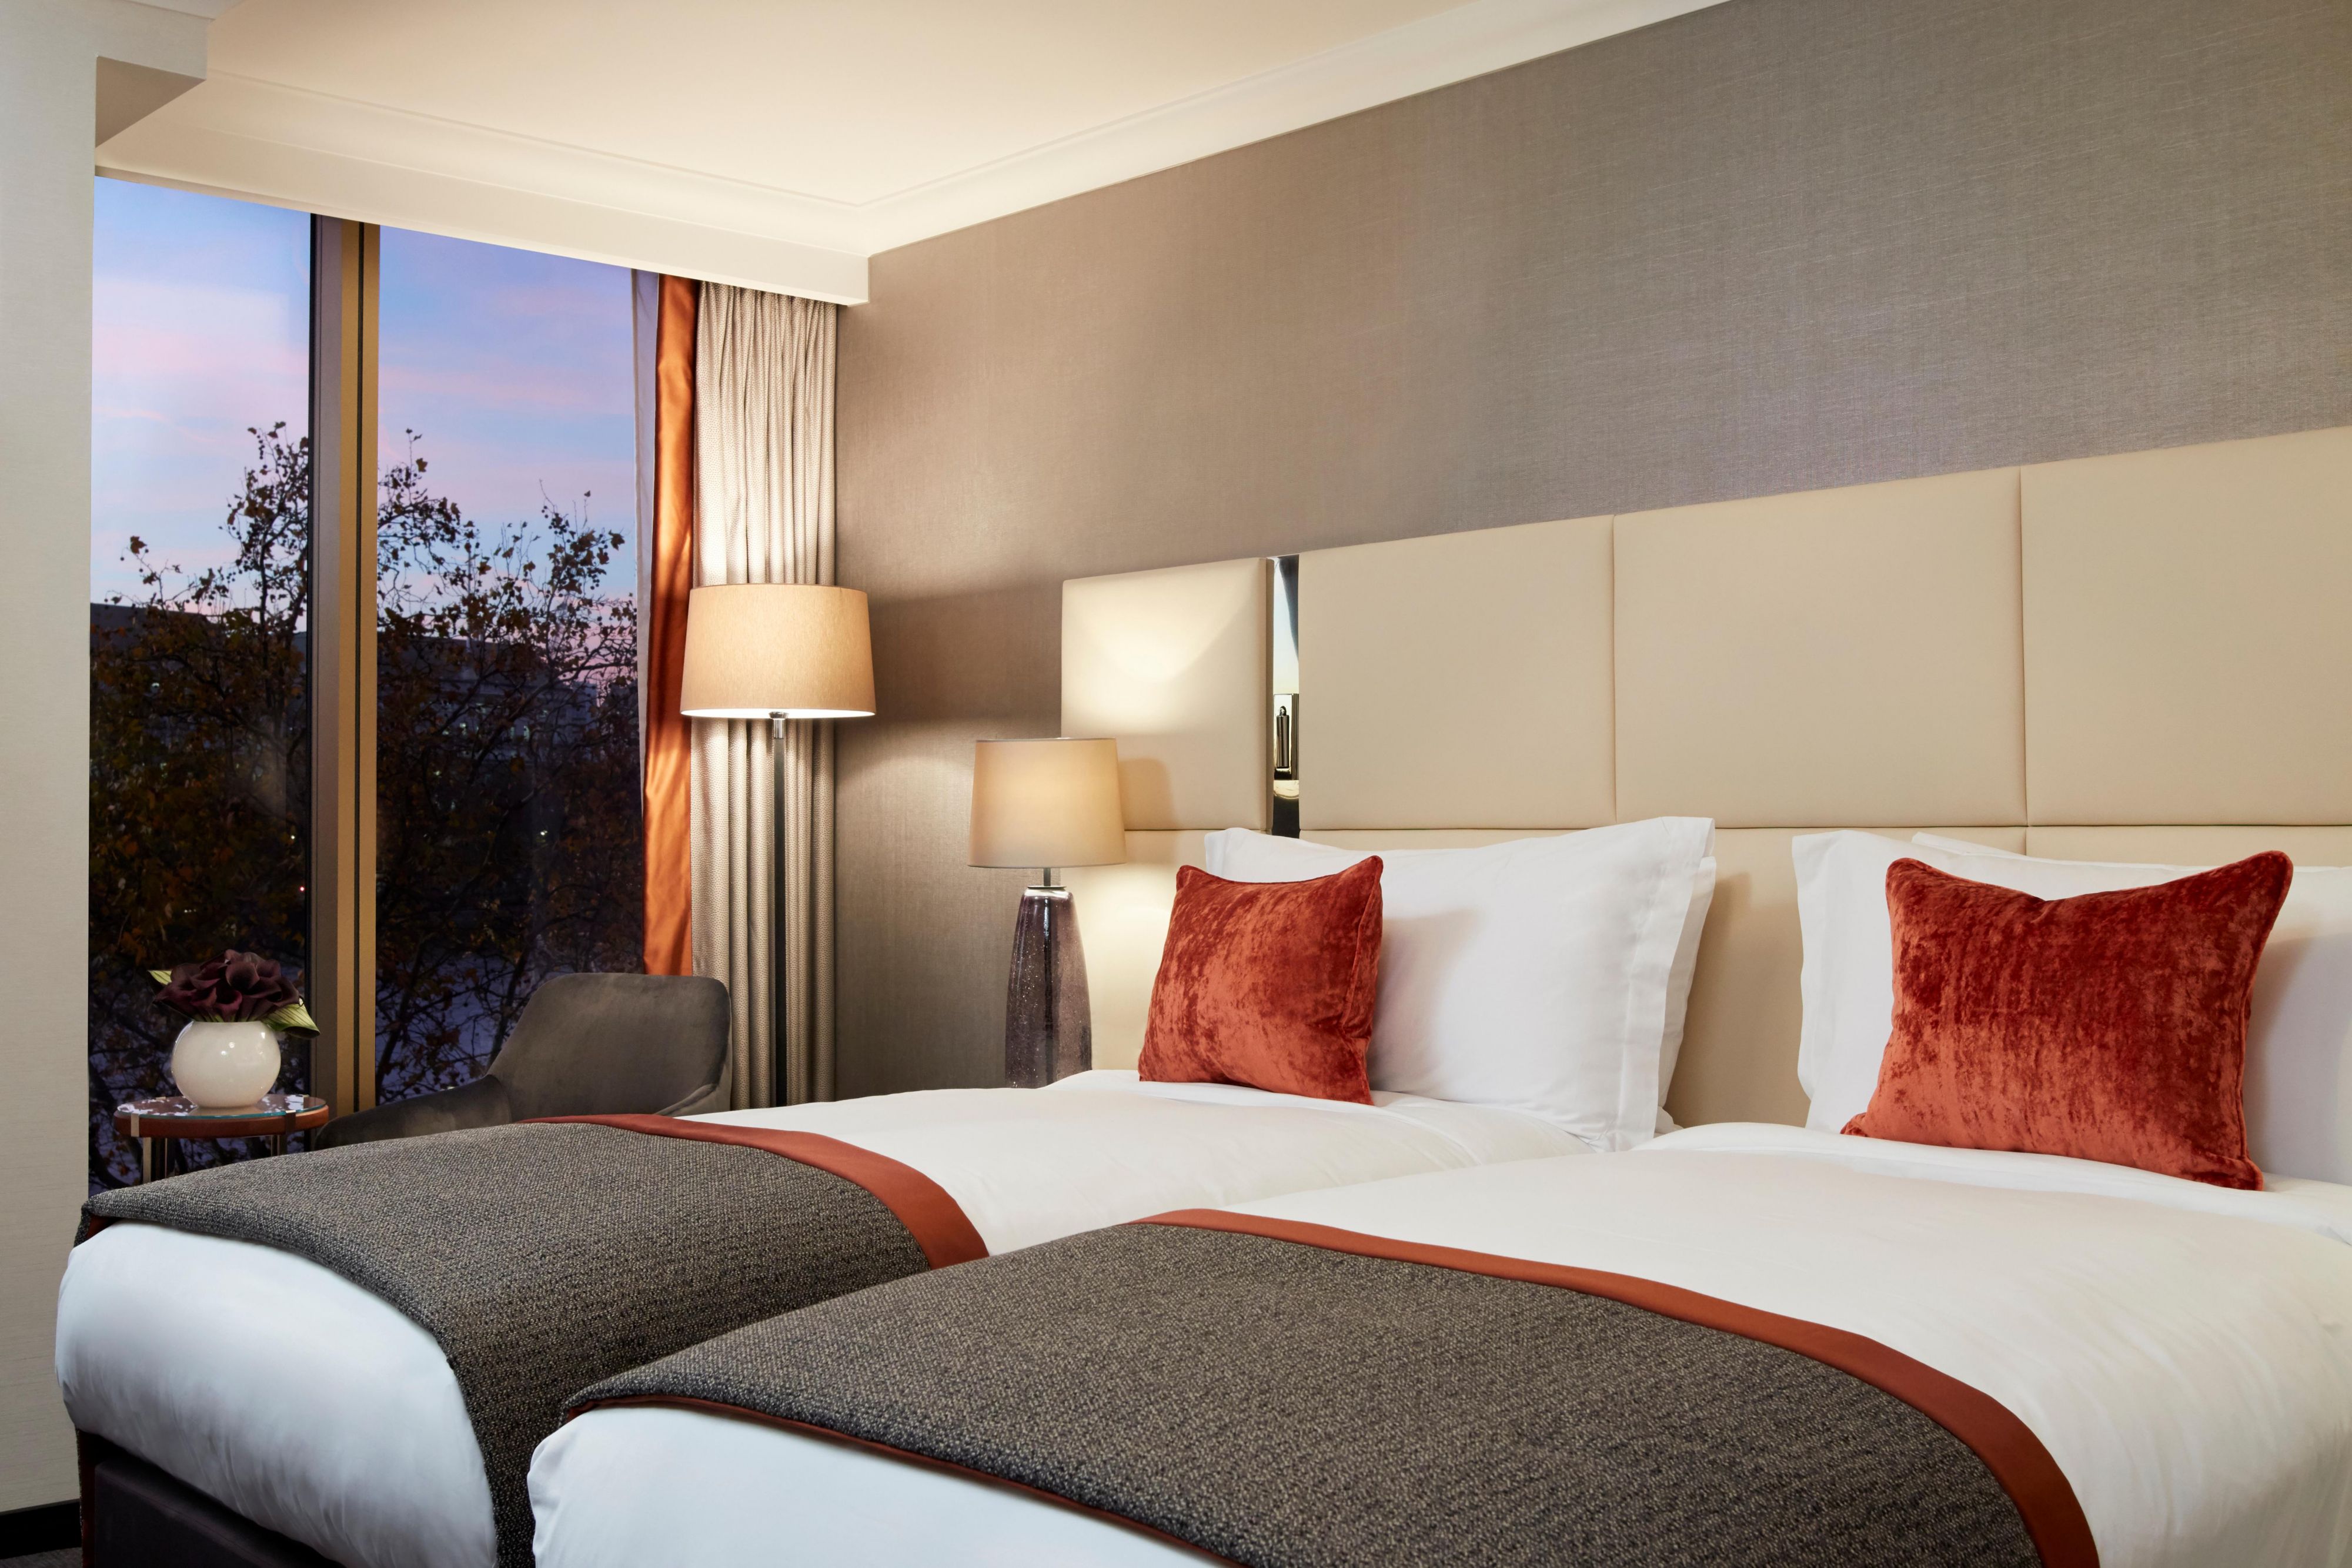 Our twin bedded rooms have views across the Thames